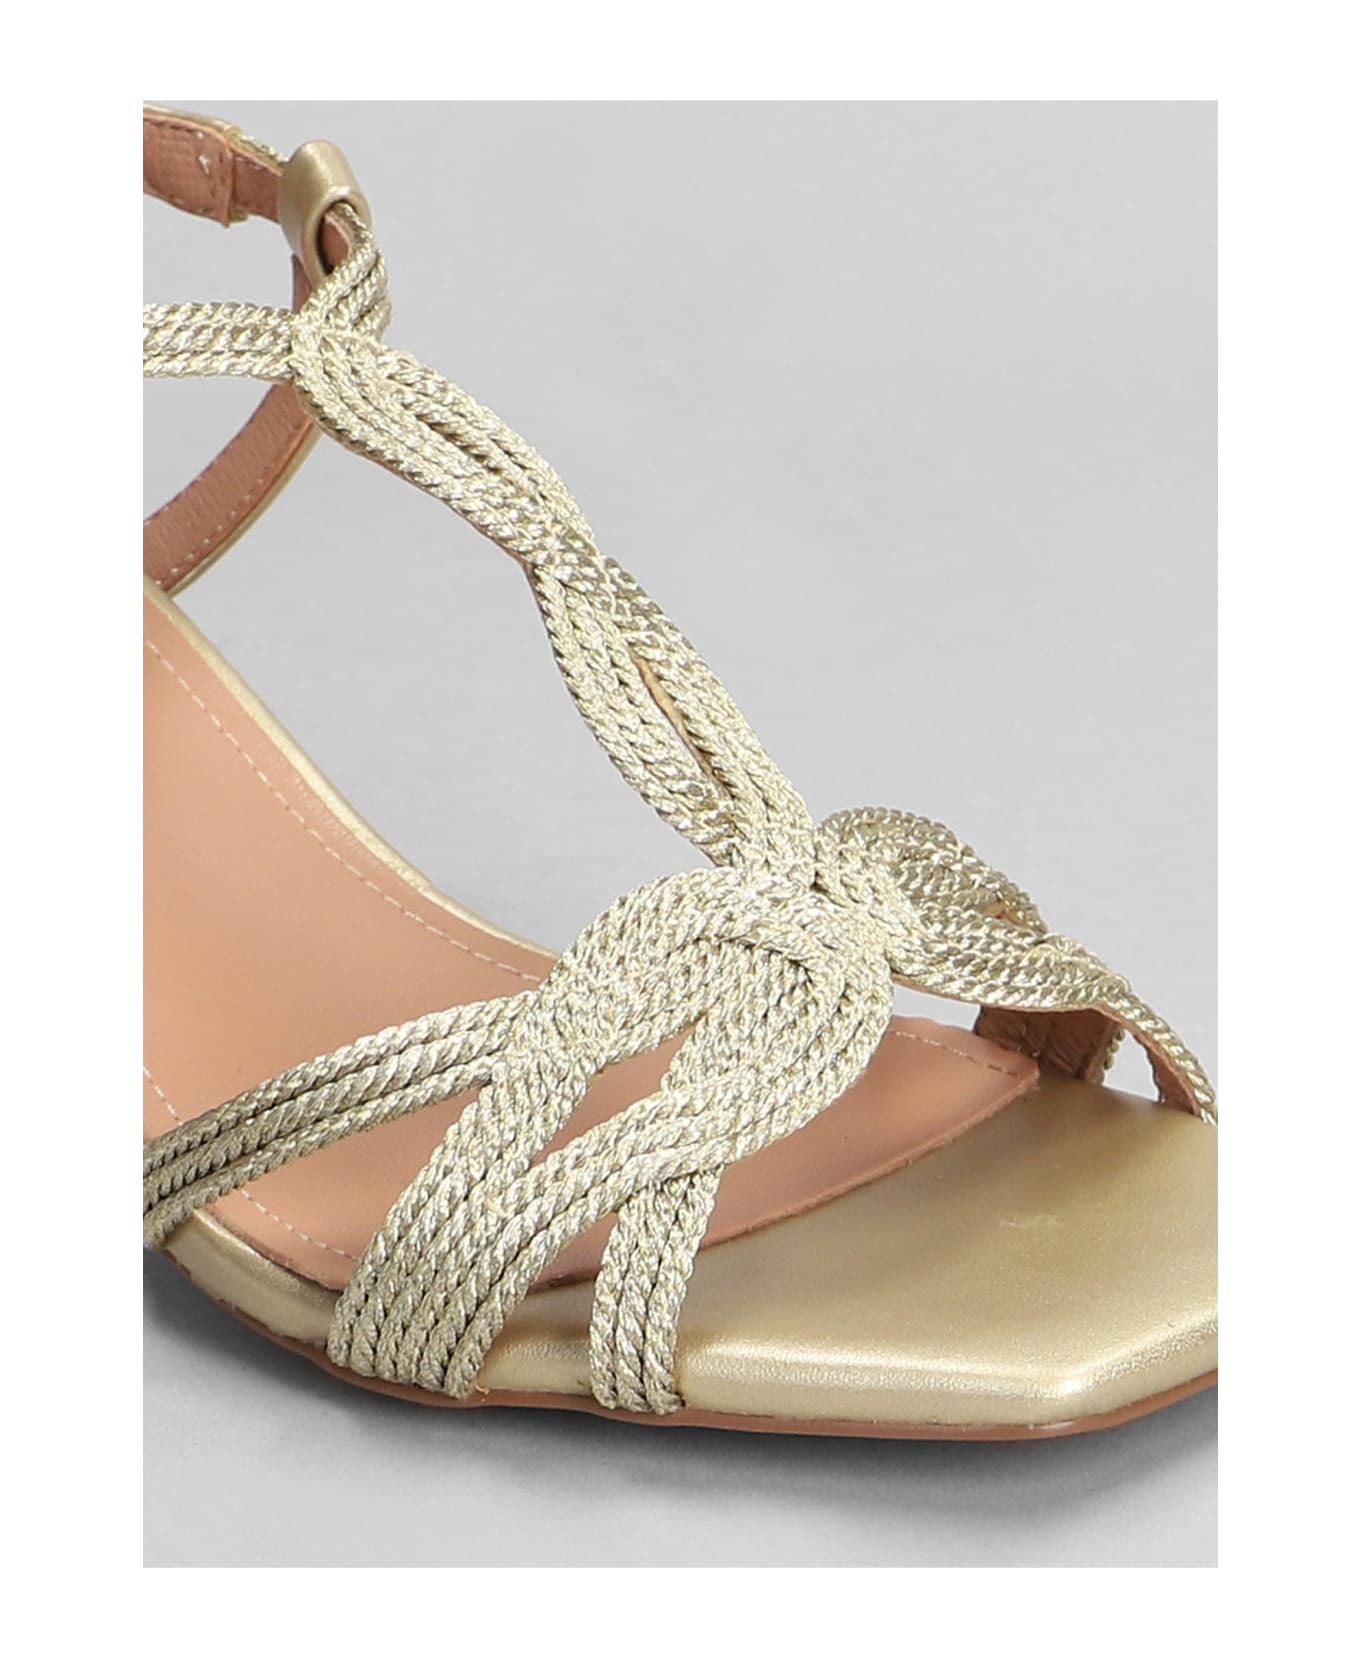 Bibi Lou Pend Sandals In Gold Leather - gold